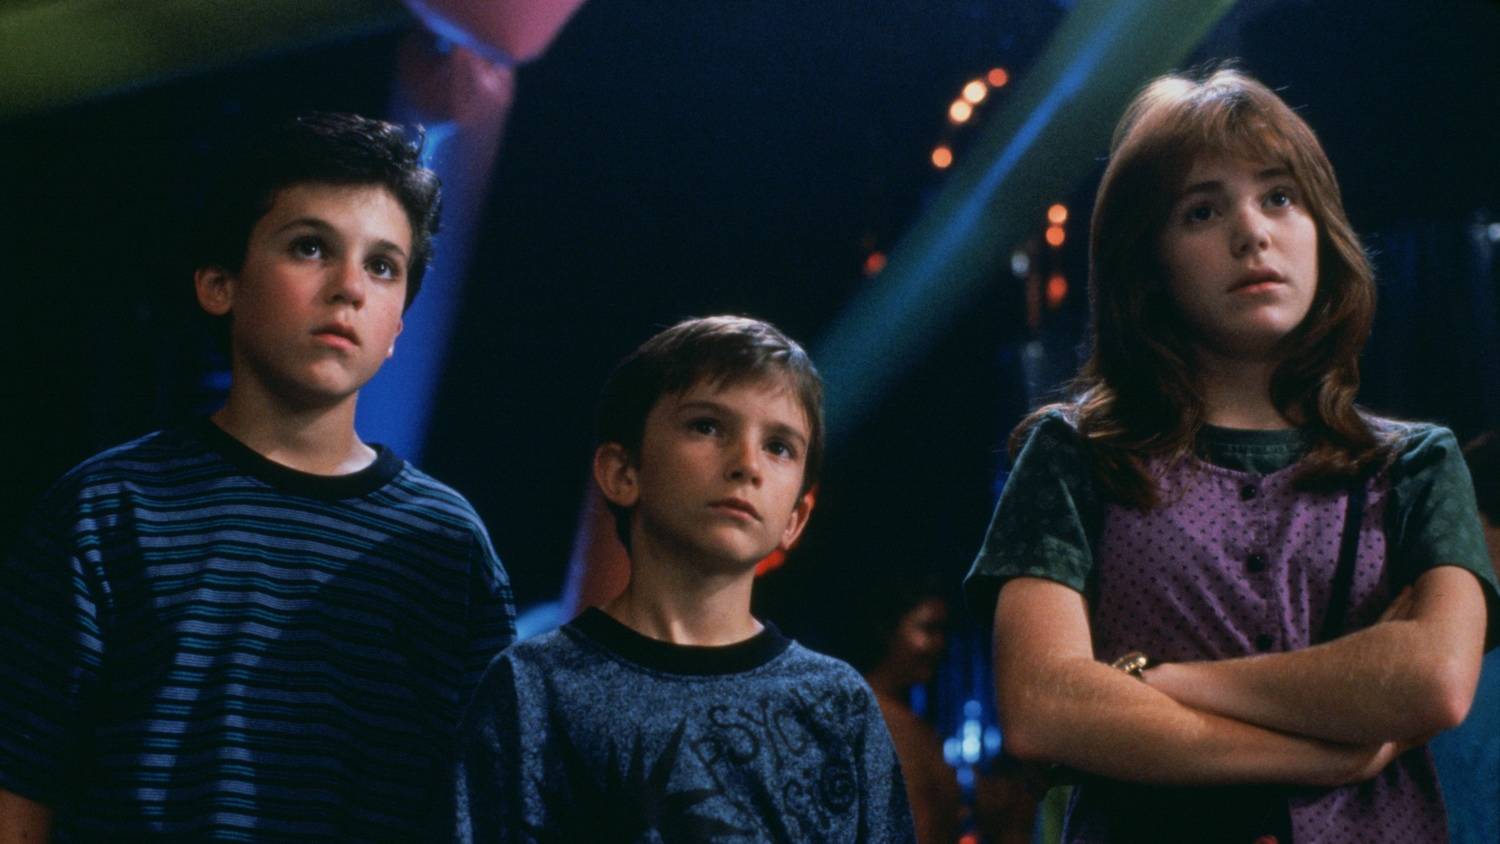 Fred Savage, Luke Edwards and Jenny Lewis in The Wizard. (Photo: Universal)